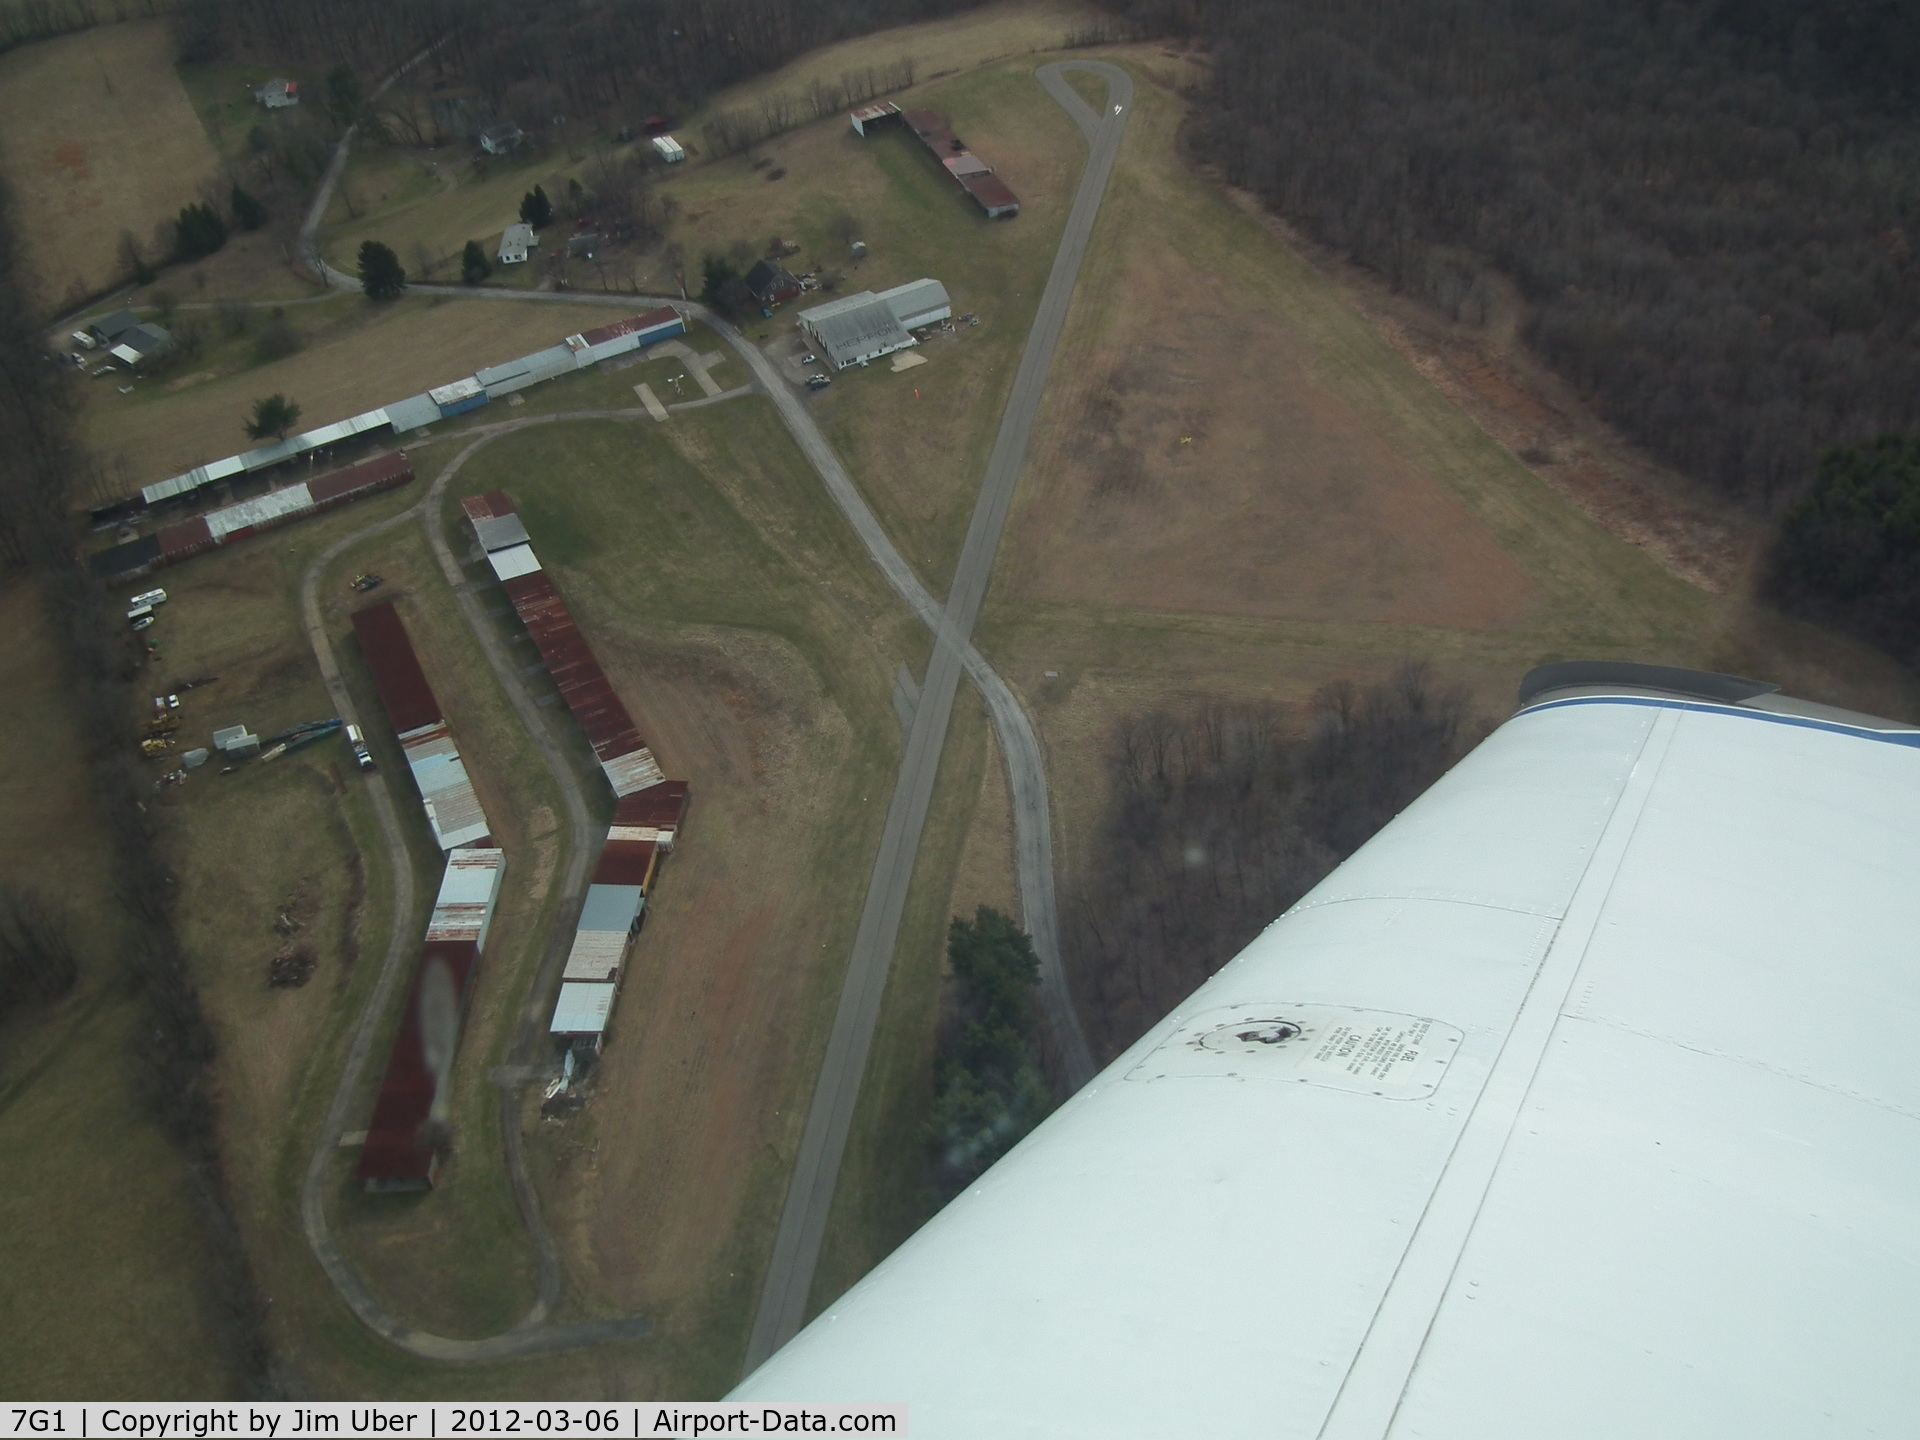 Herron Airport (7G1) - There's a large difference in elevation from the 